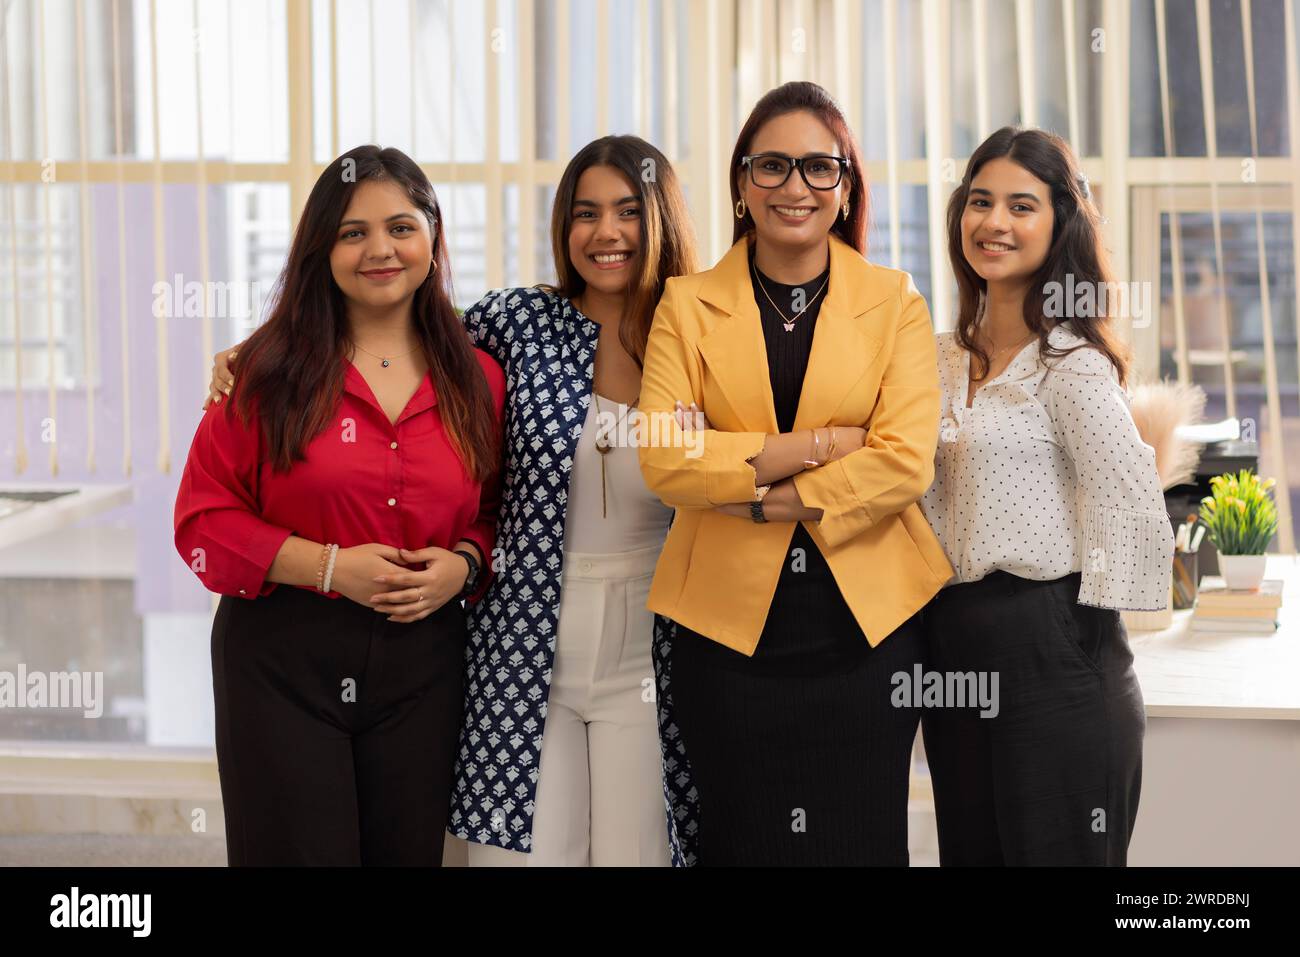 Portrait of a group of businesswomen standing together in an office Stock Photo